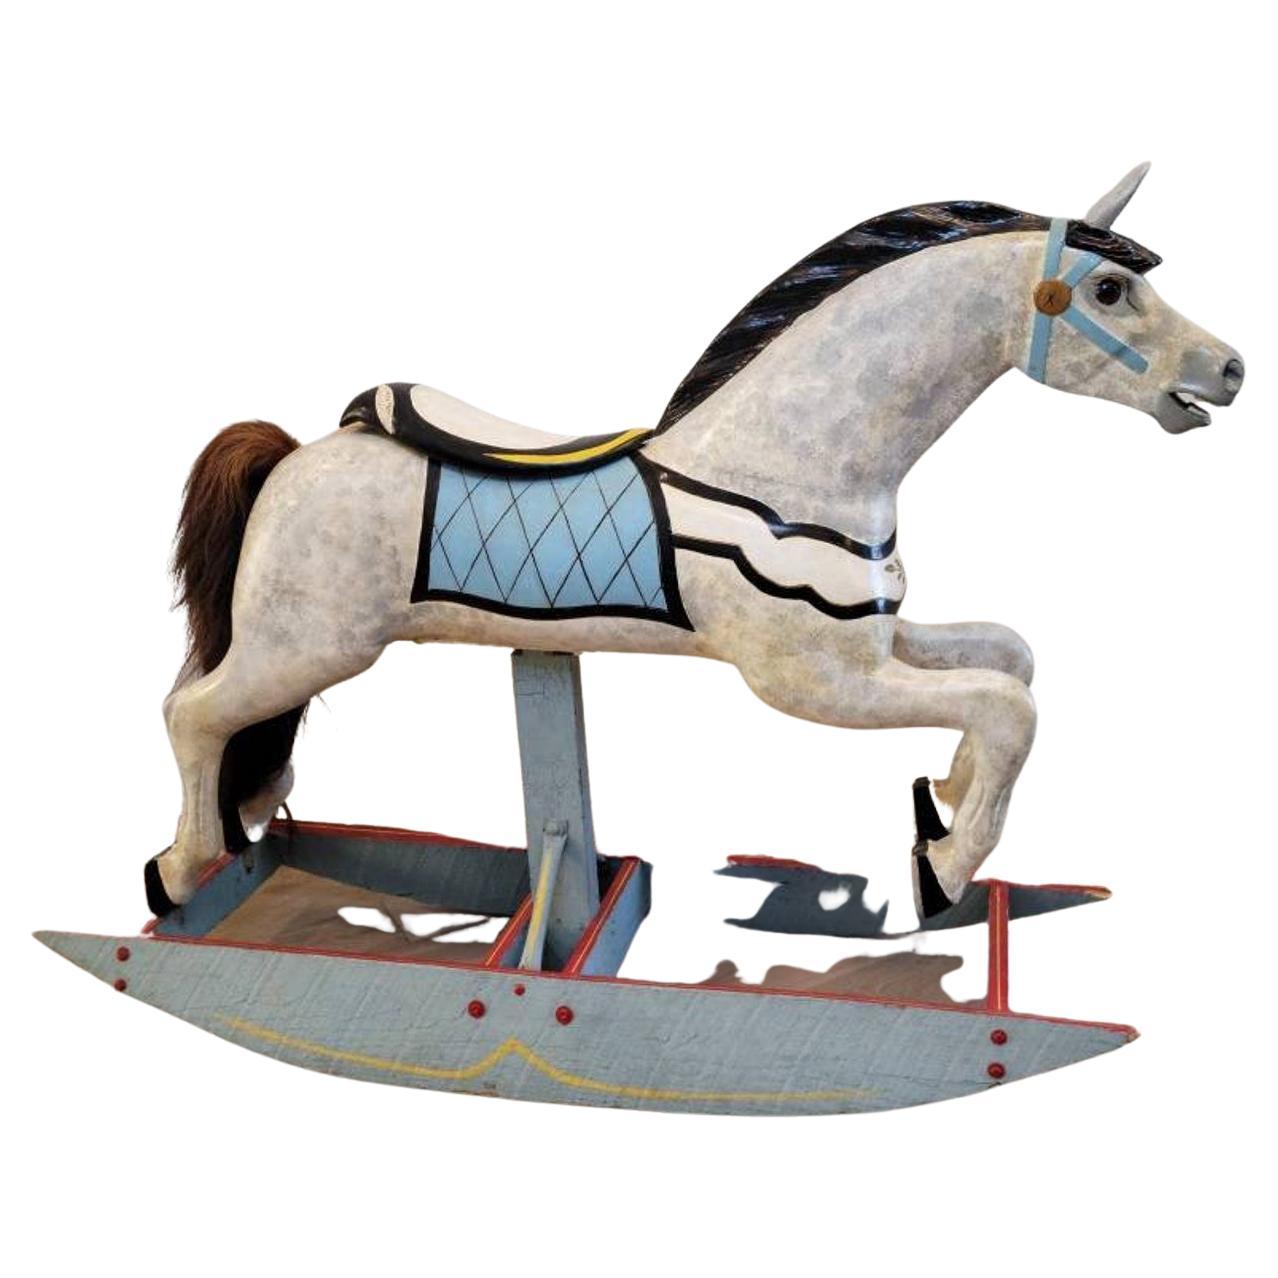 Antique American Dapple Jumper Track Carousel Horse, Charles W Dare Attributed